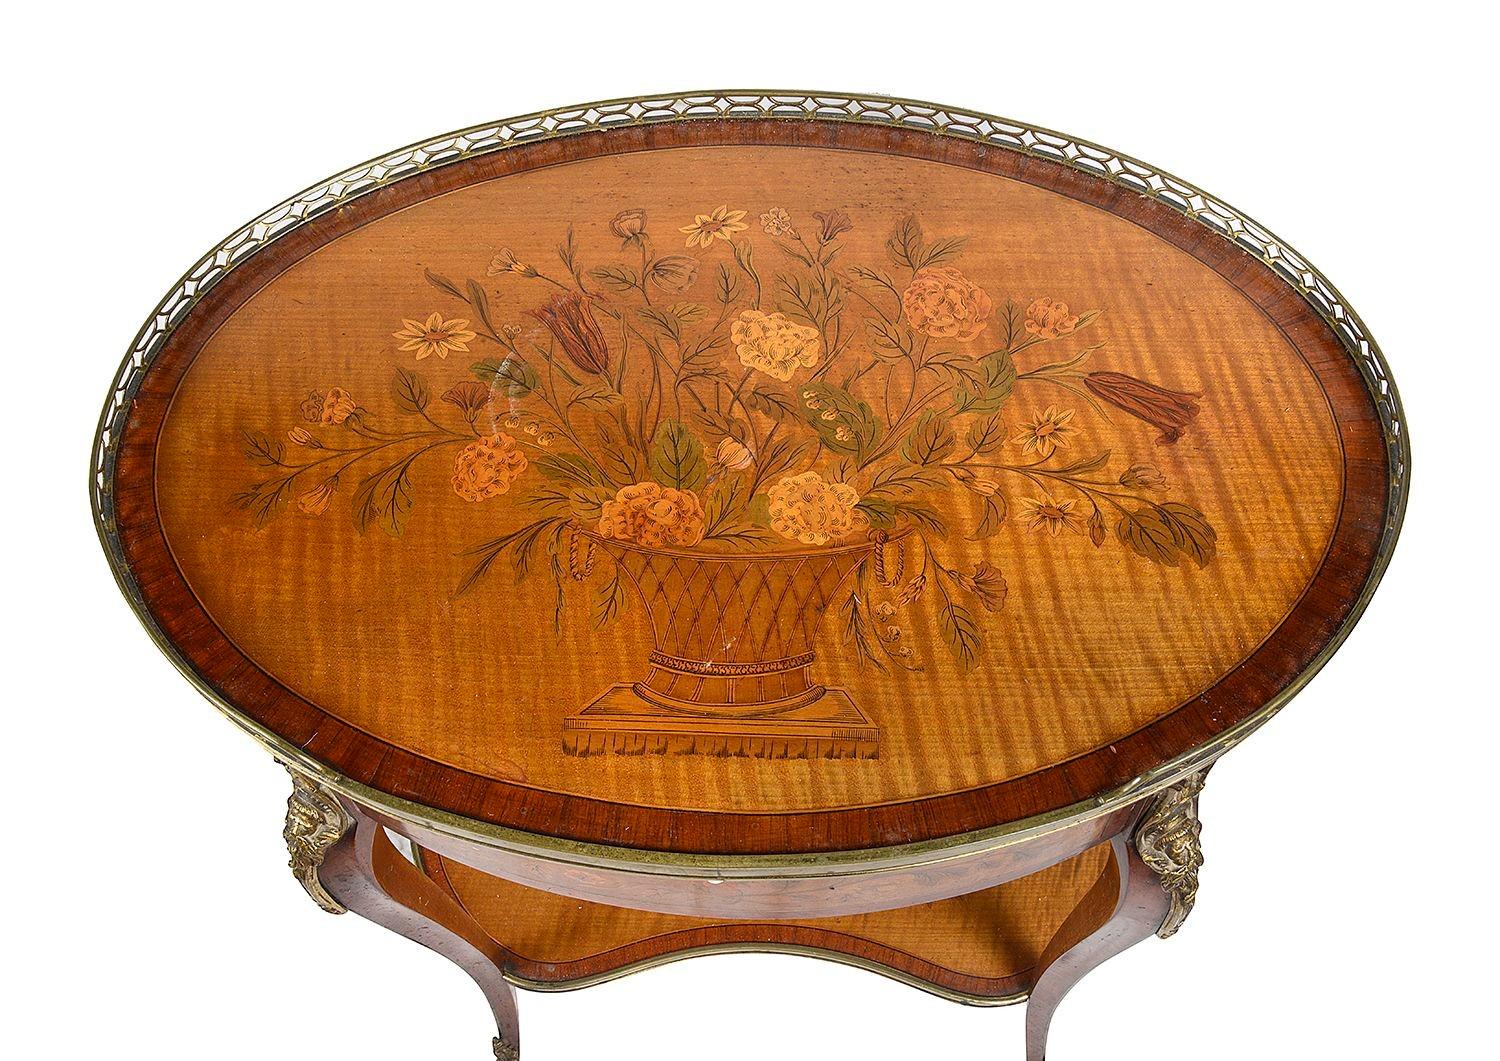 A very good quality late 19th Century French marquetry inlaid oval side table. The top having this wonderful inlaid basket of flowers, a brass pierced gallery, a candle slide and single frieze drawer. floral marquetry inlay to the frieze, elegant